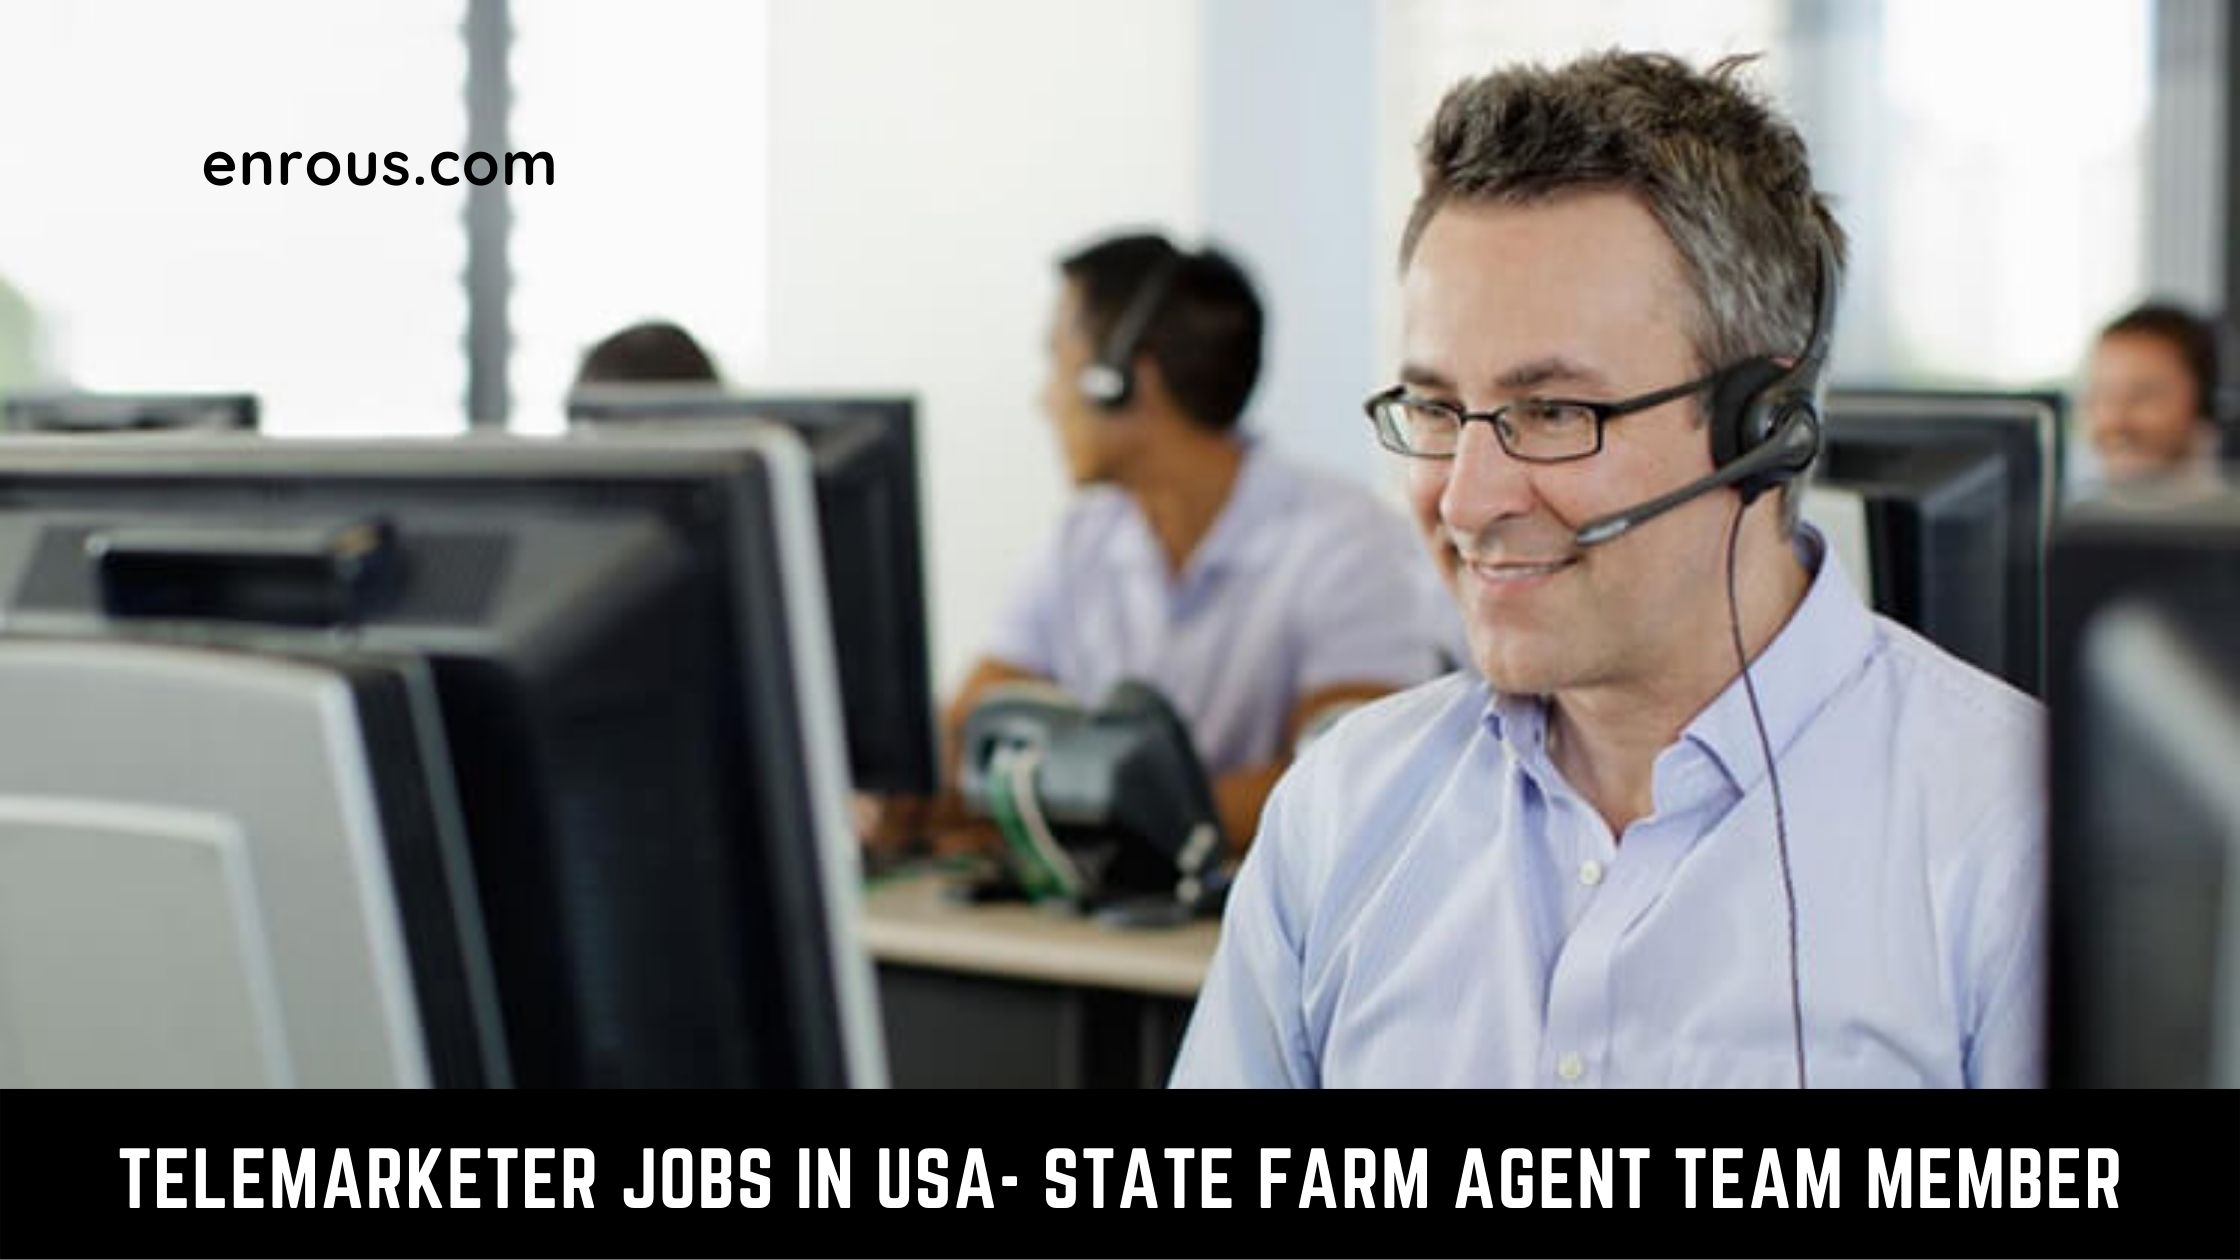 Telemarketer Jobs in USA- State Farm Agent Team Member